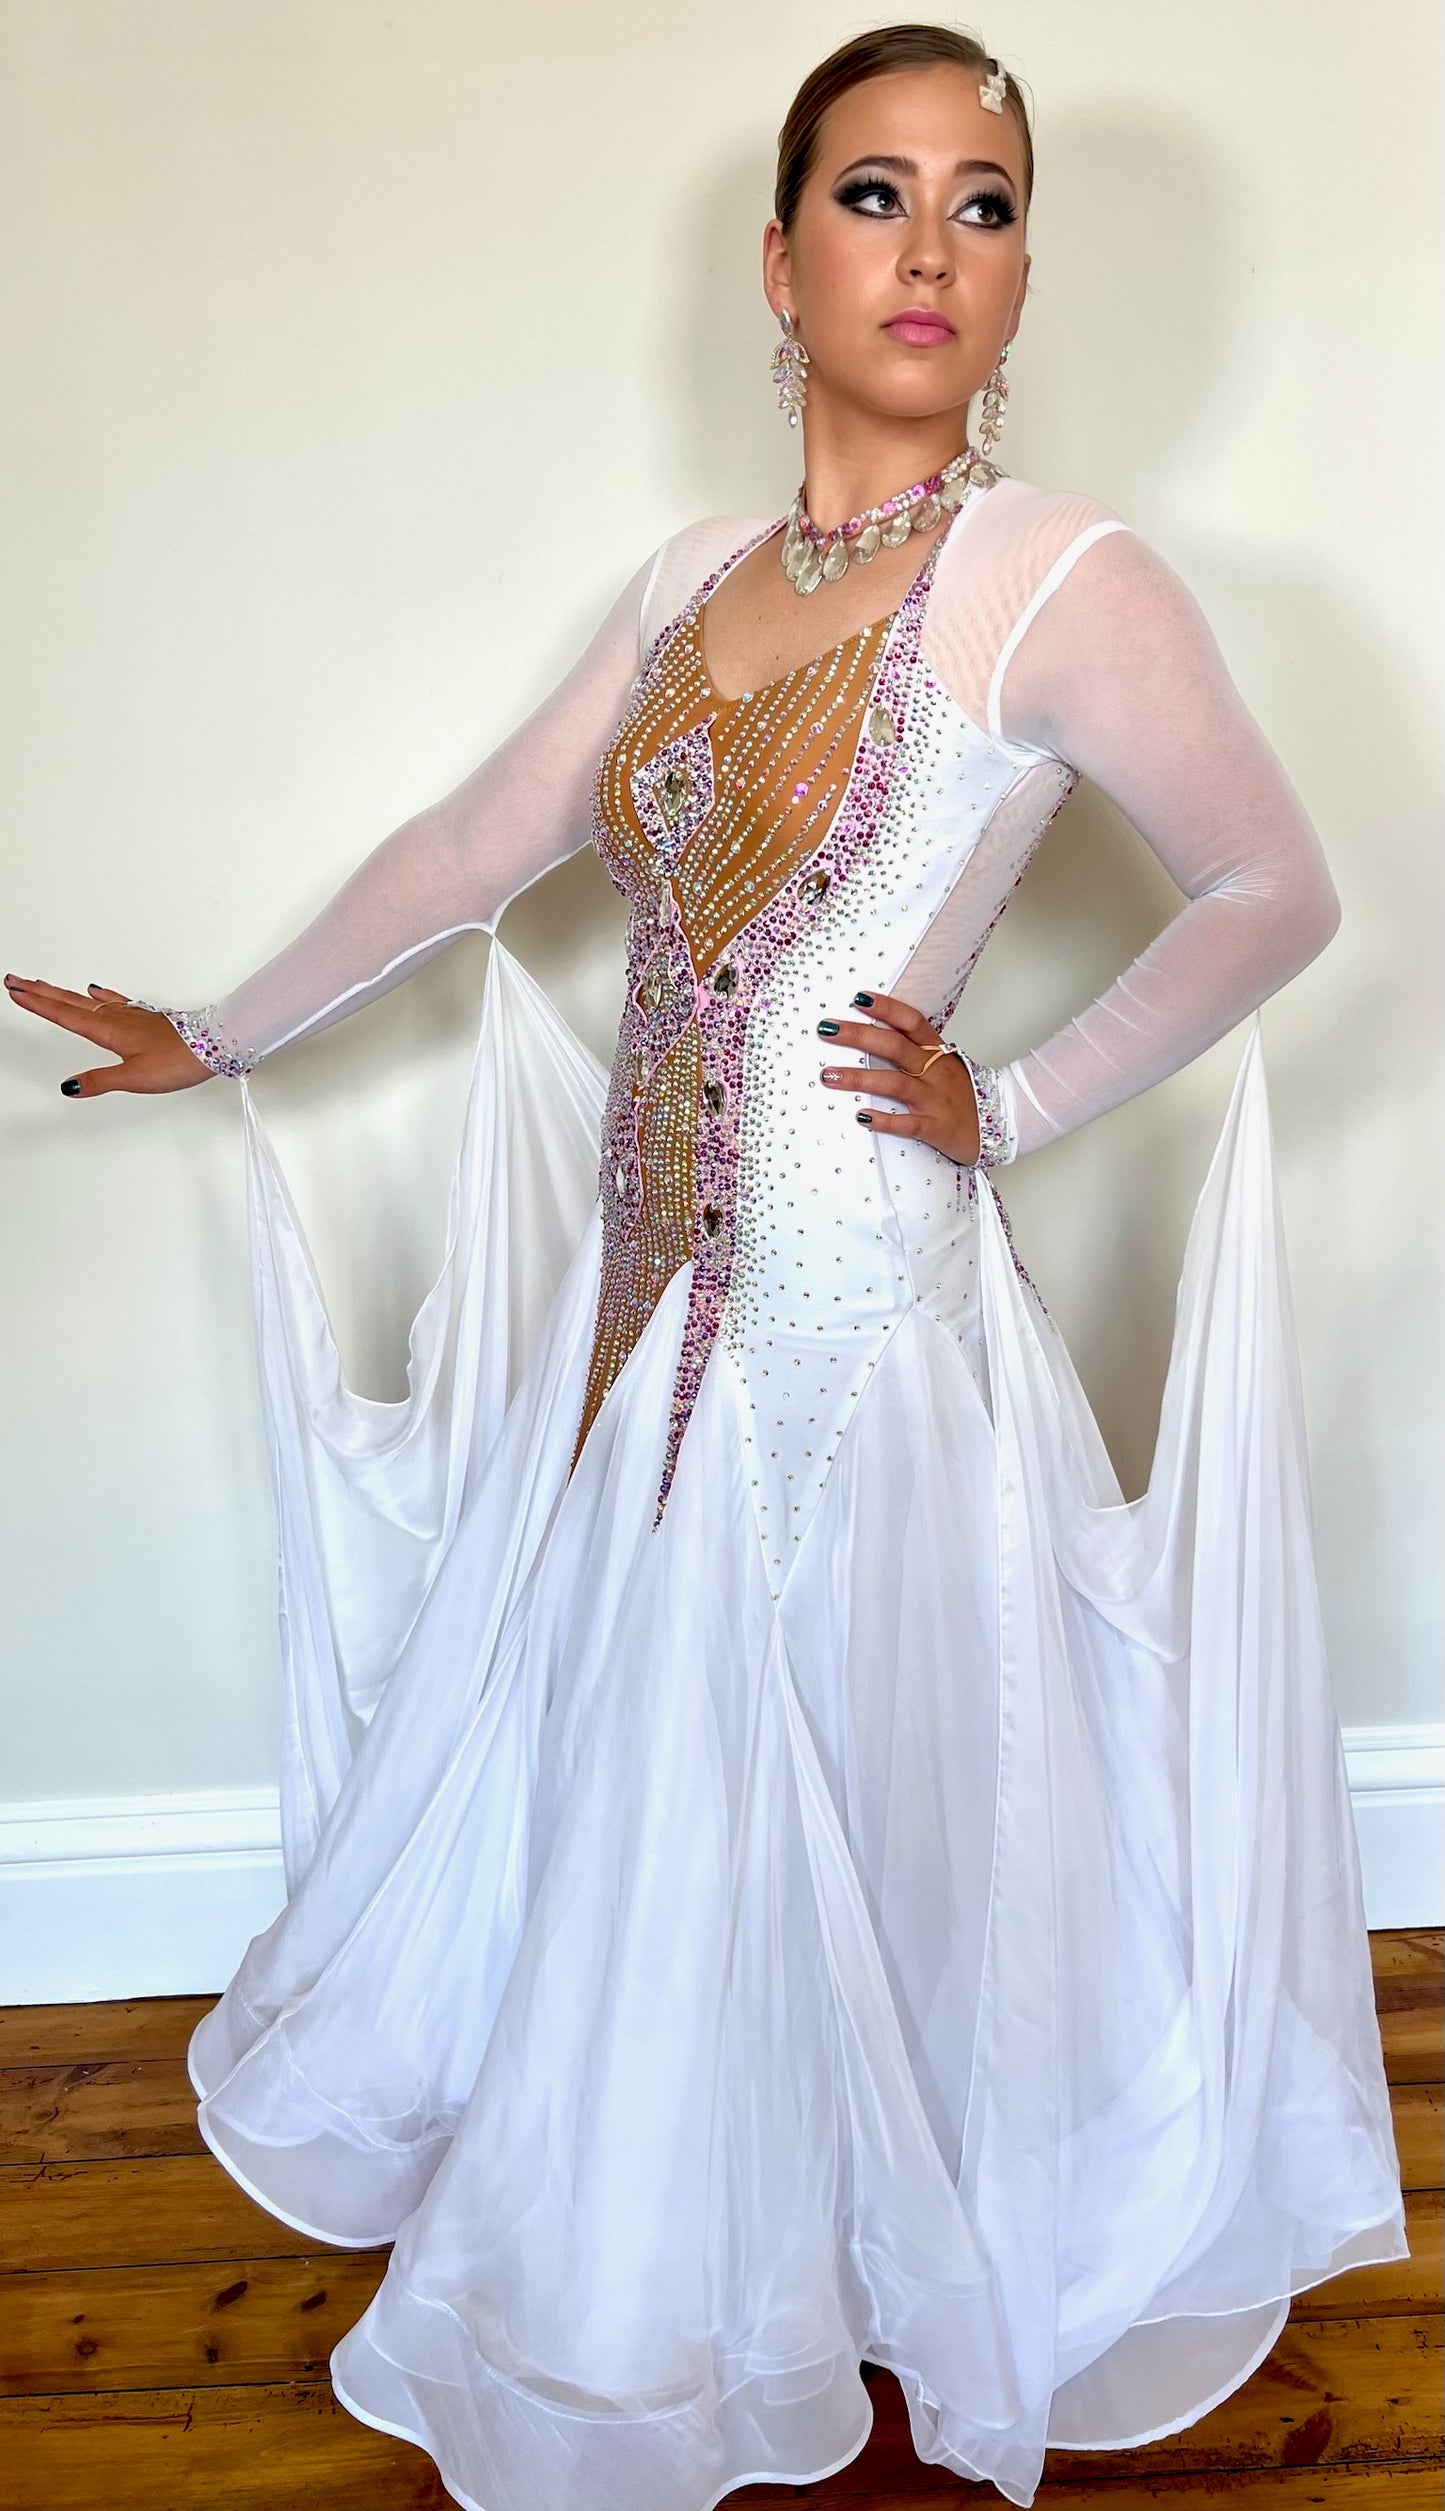 247 White and Tan Ballroom Dress. Stunning decoration stoned in AB & light rose. Floats to sleeves & back.